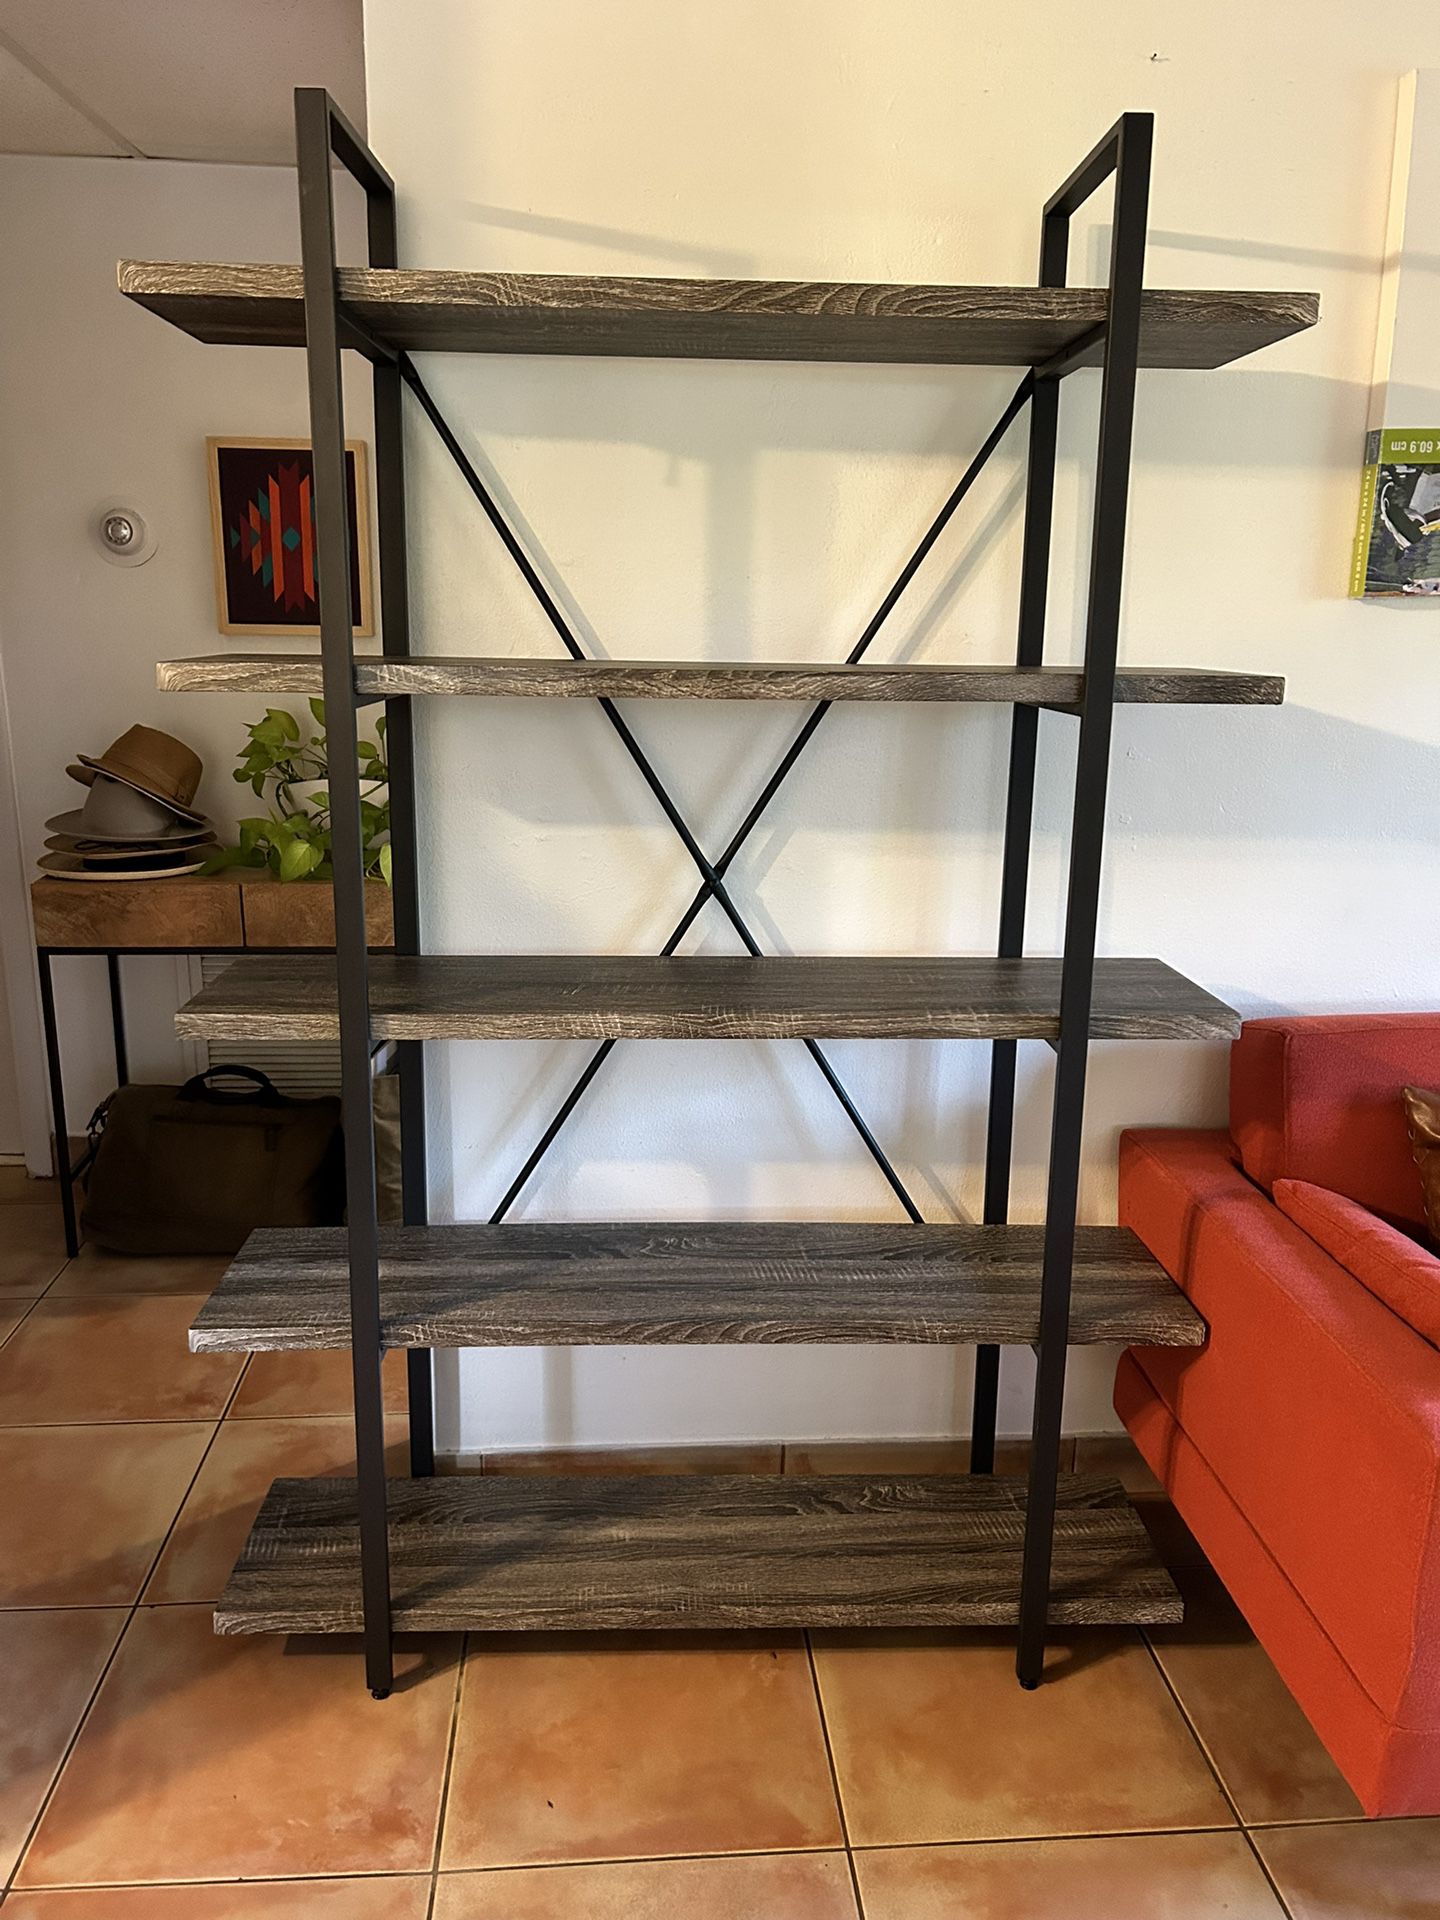 5 Tiers Shelf Unit,      STILL AVAILABLE!! May 22